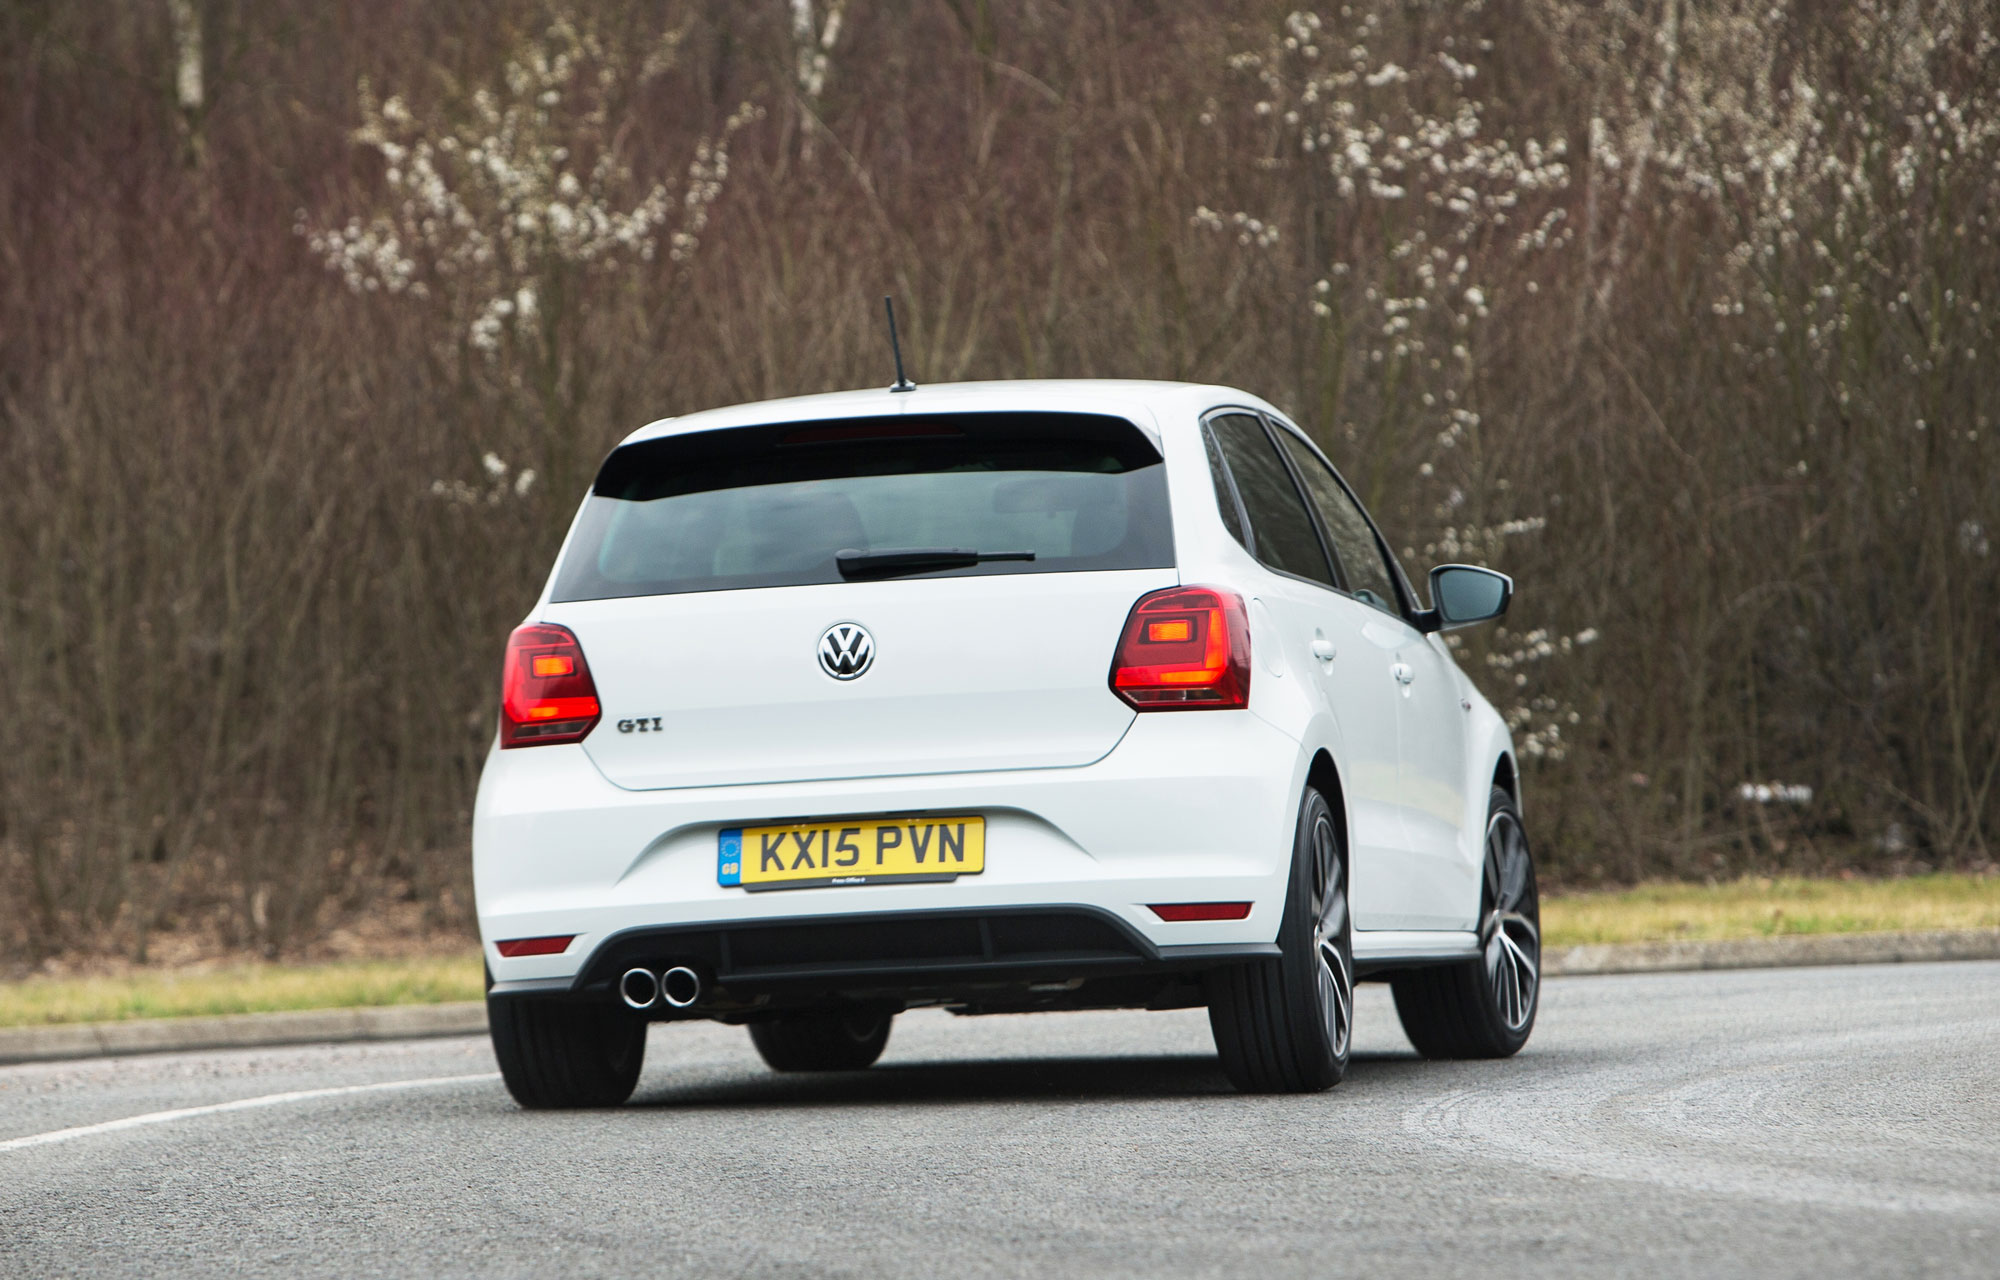 VW Polo GTI review - prices, specs and 0-60 time